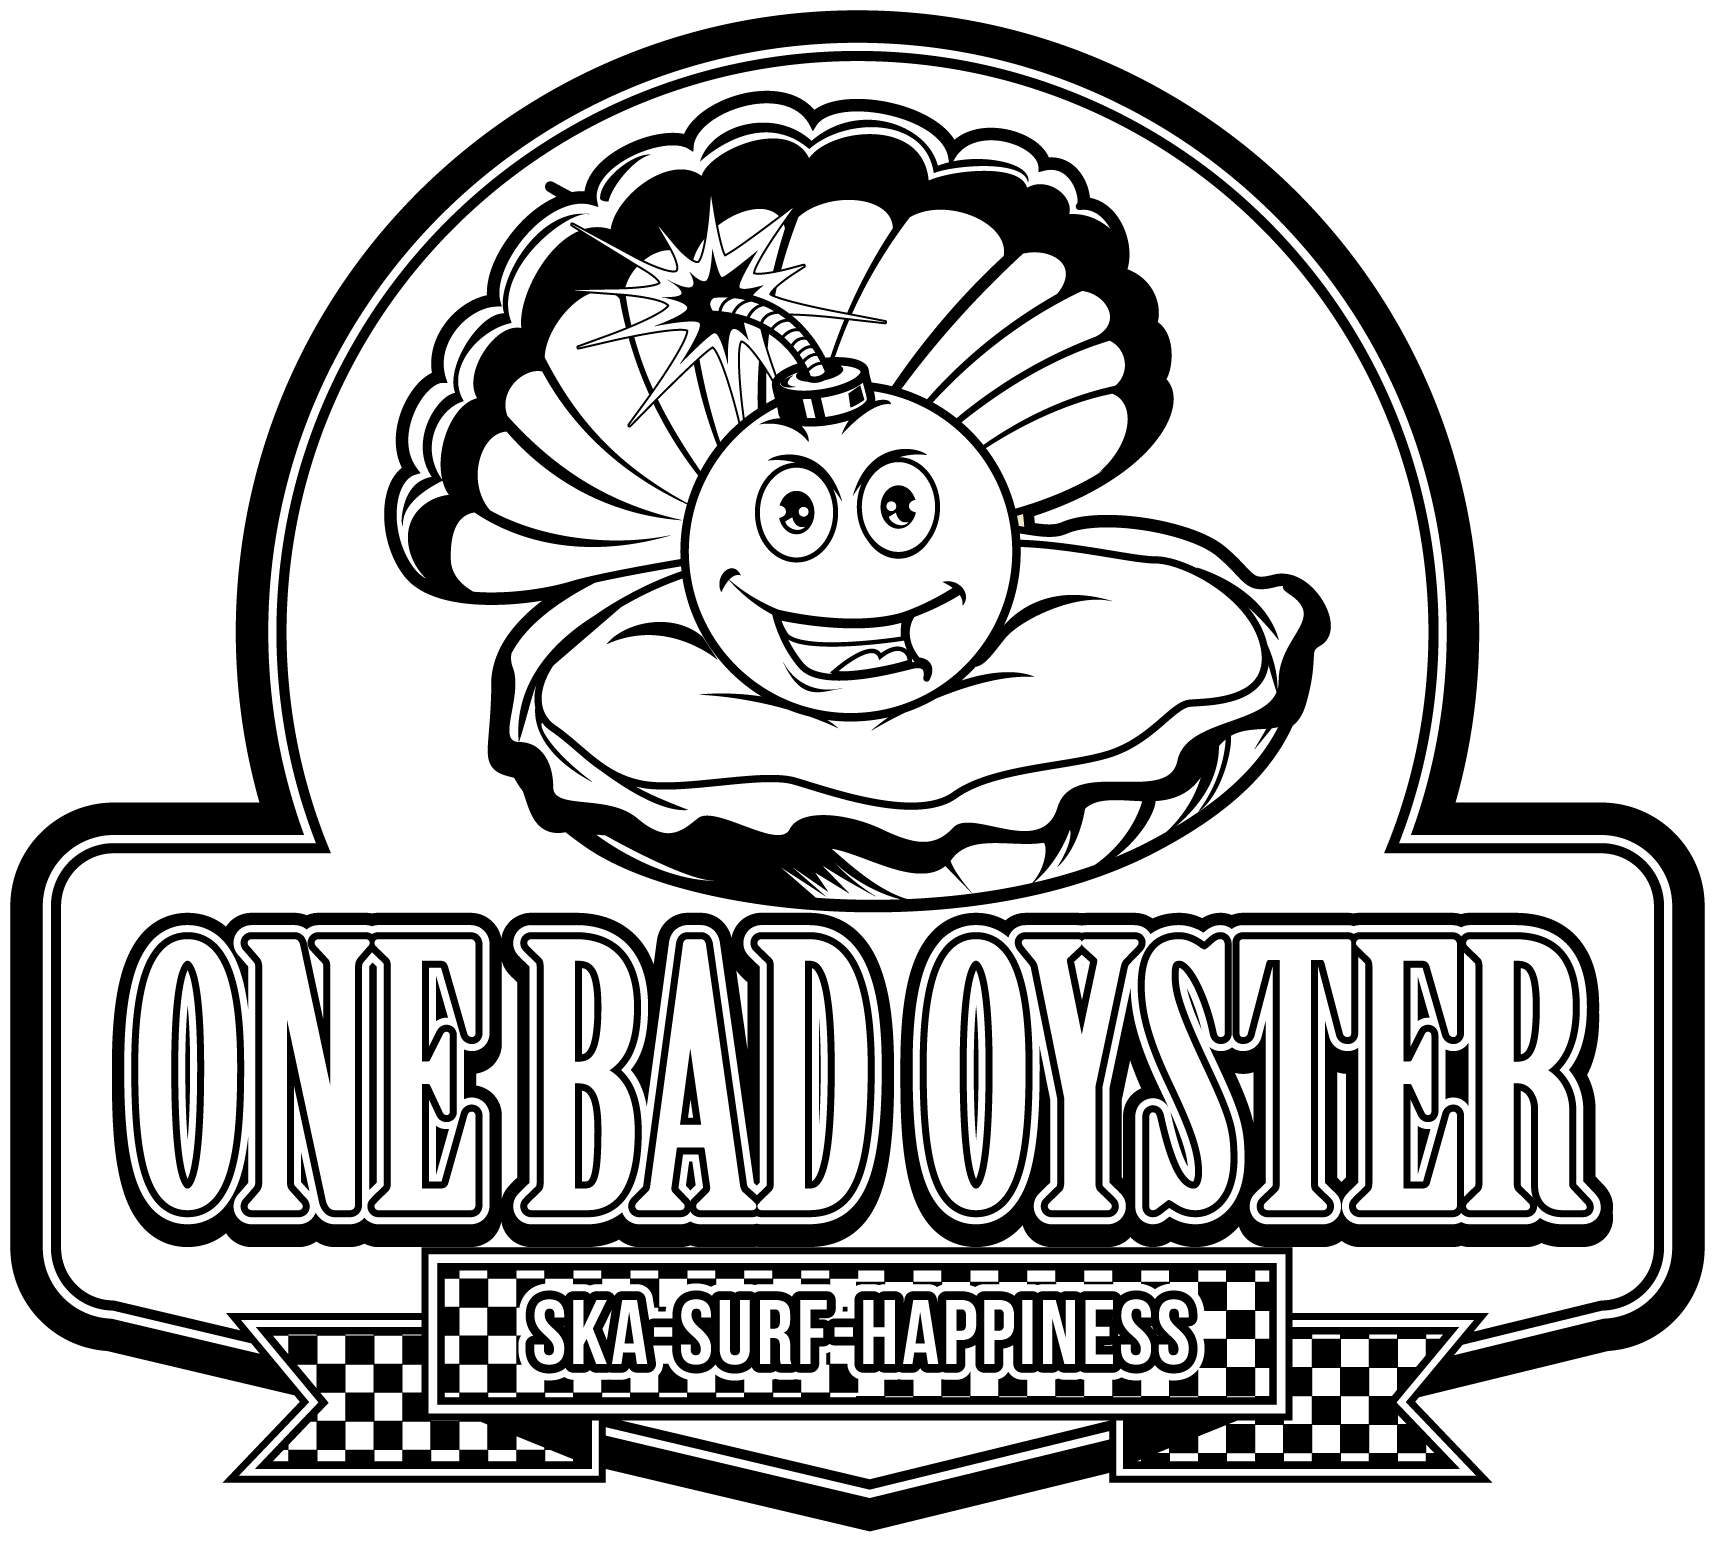 One Bad Oyster